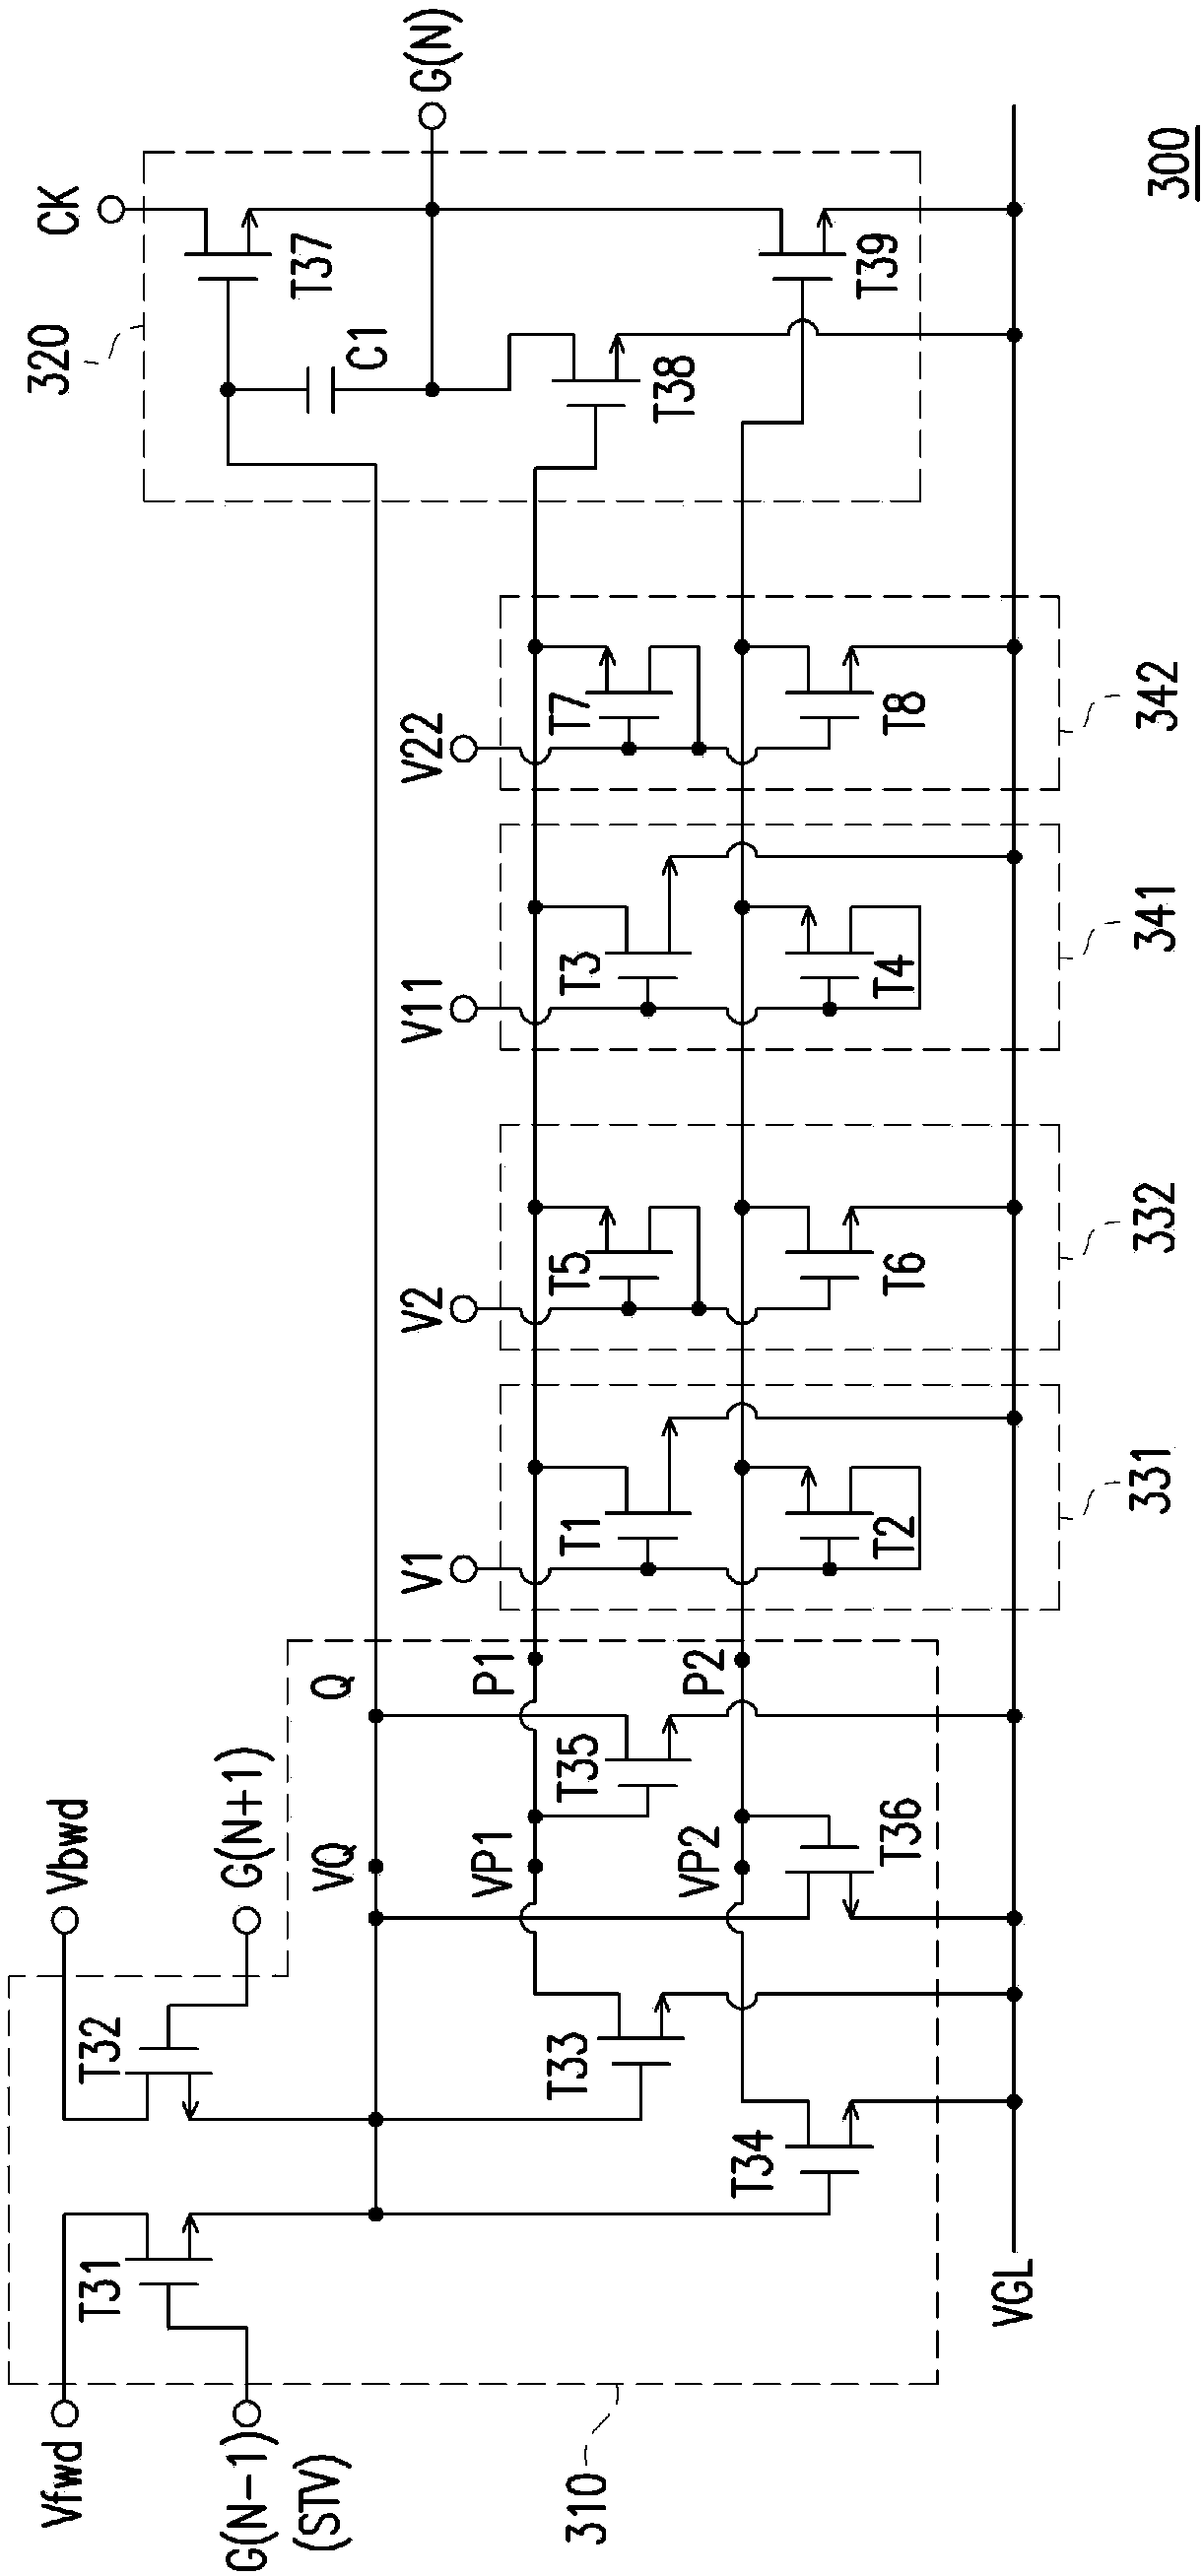 Displacement temporary storage device